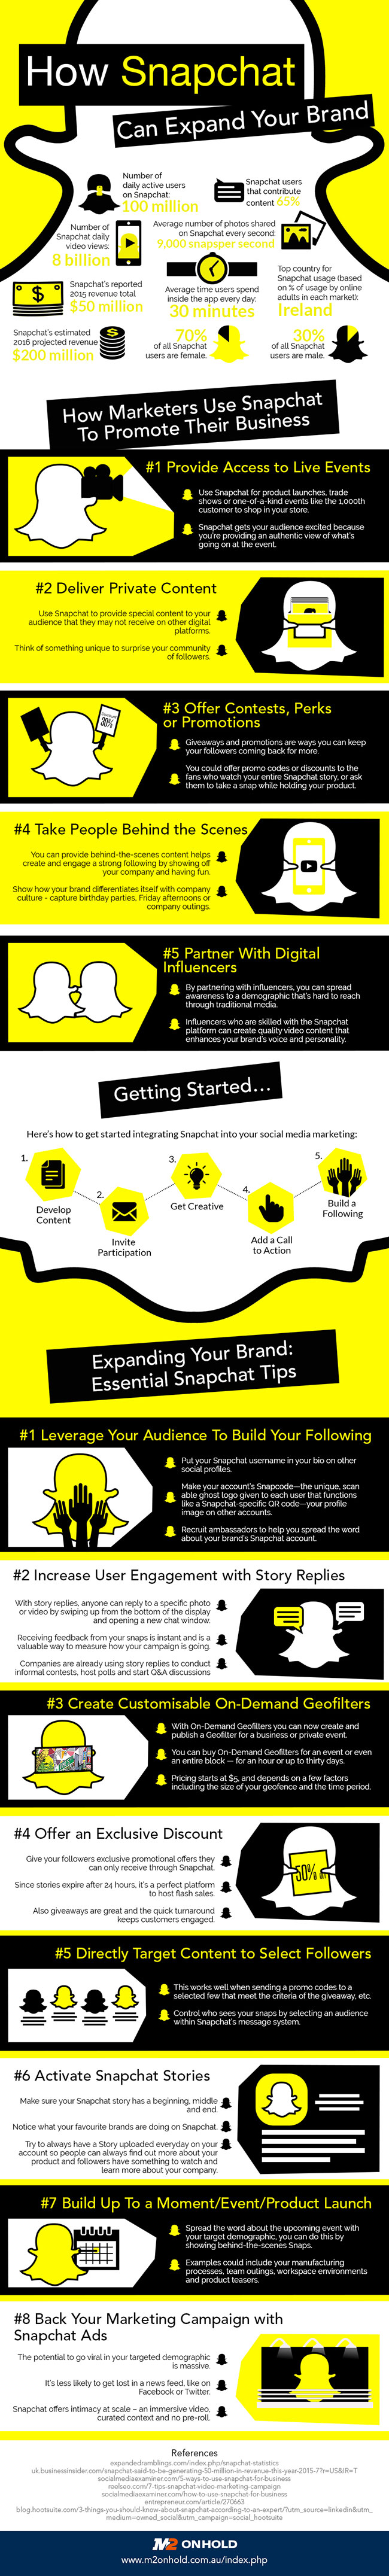 How-Snapchat-Can-Expand-Your-Brand-[Infographic]